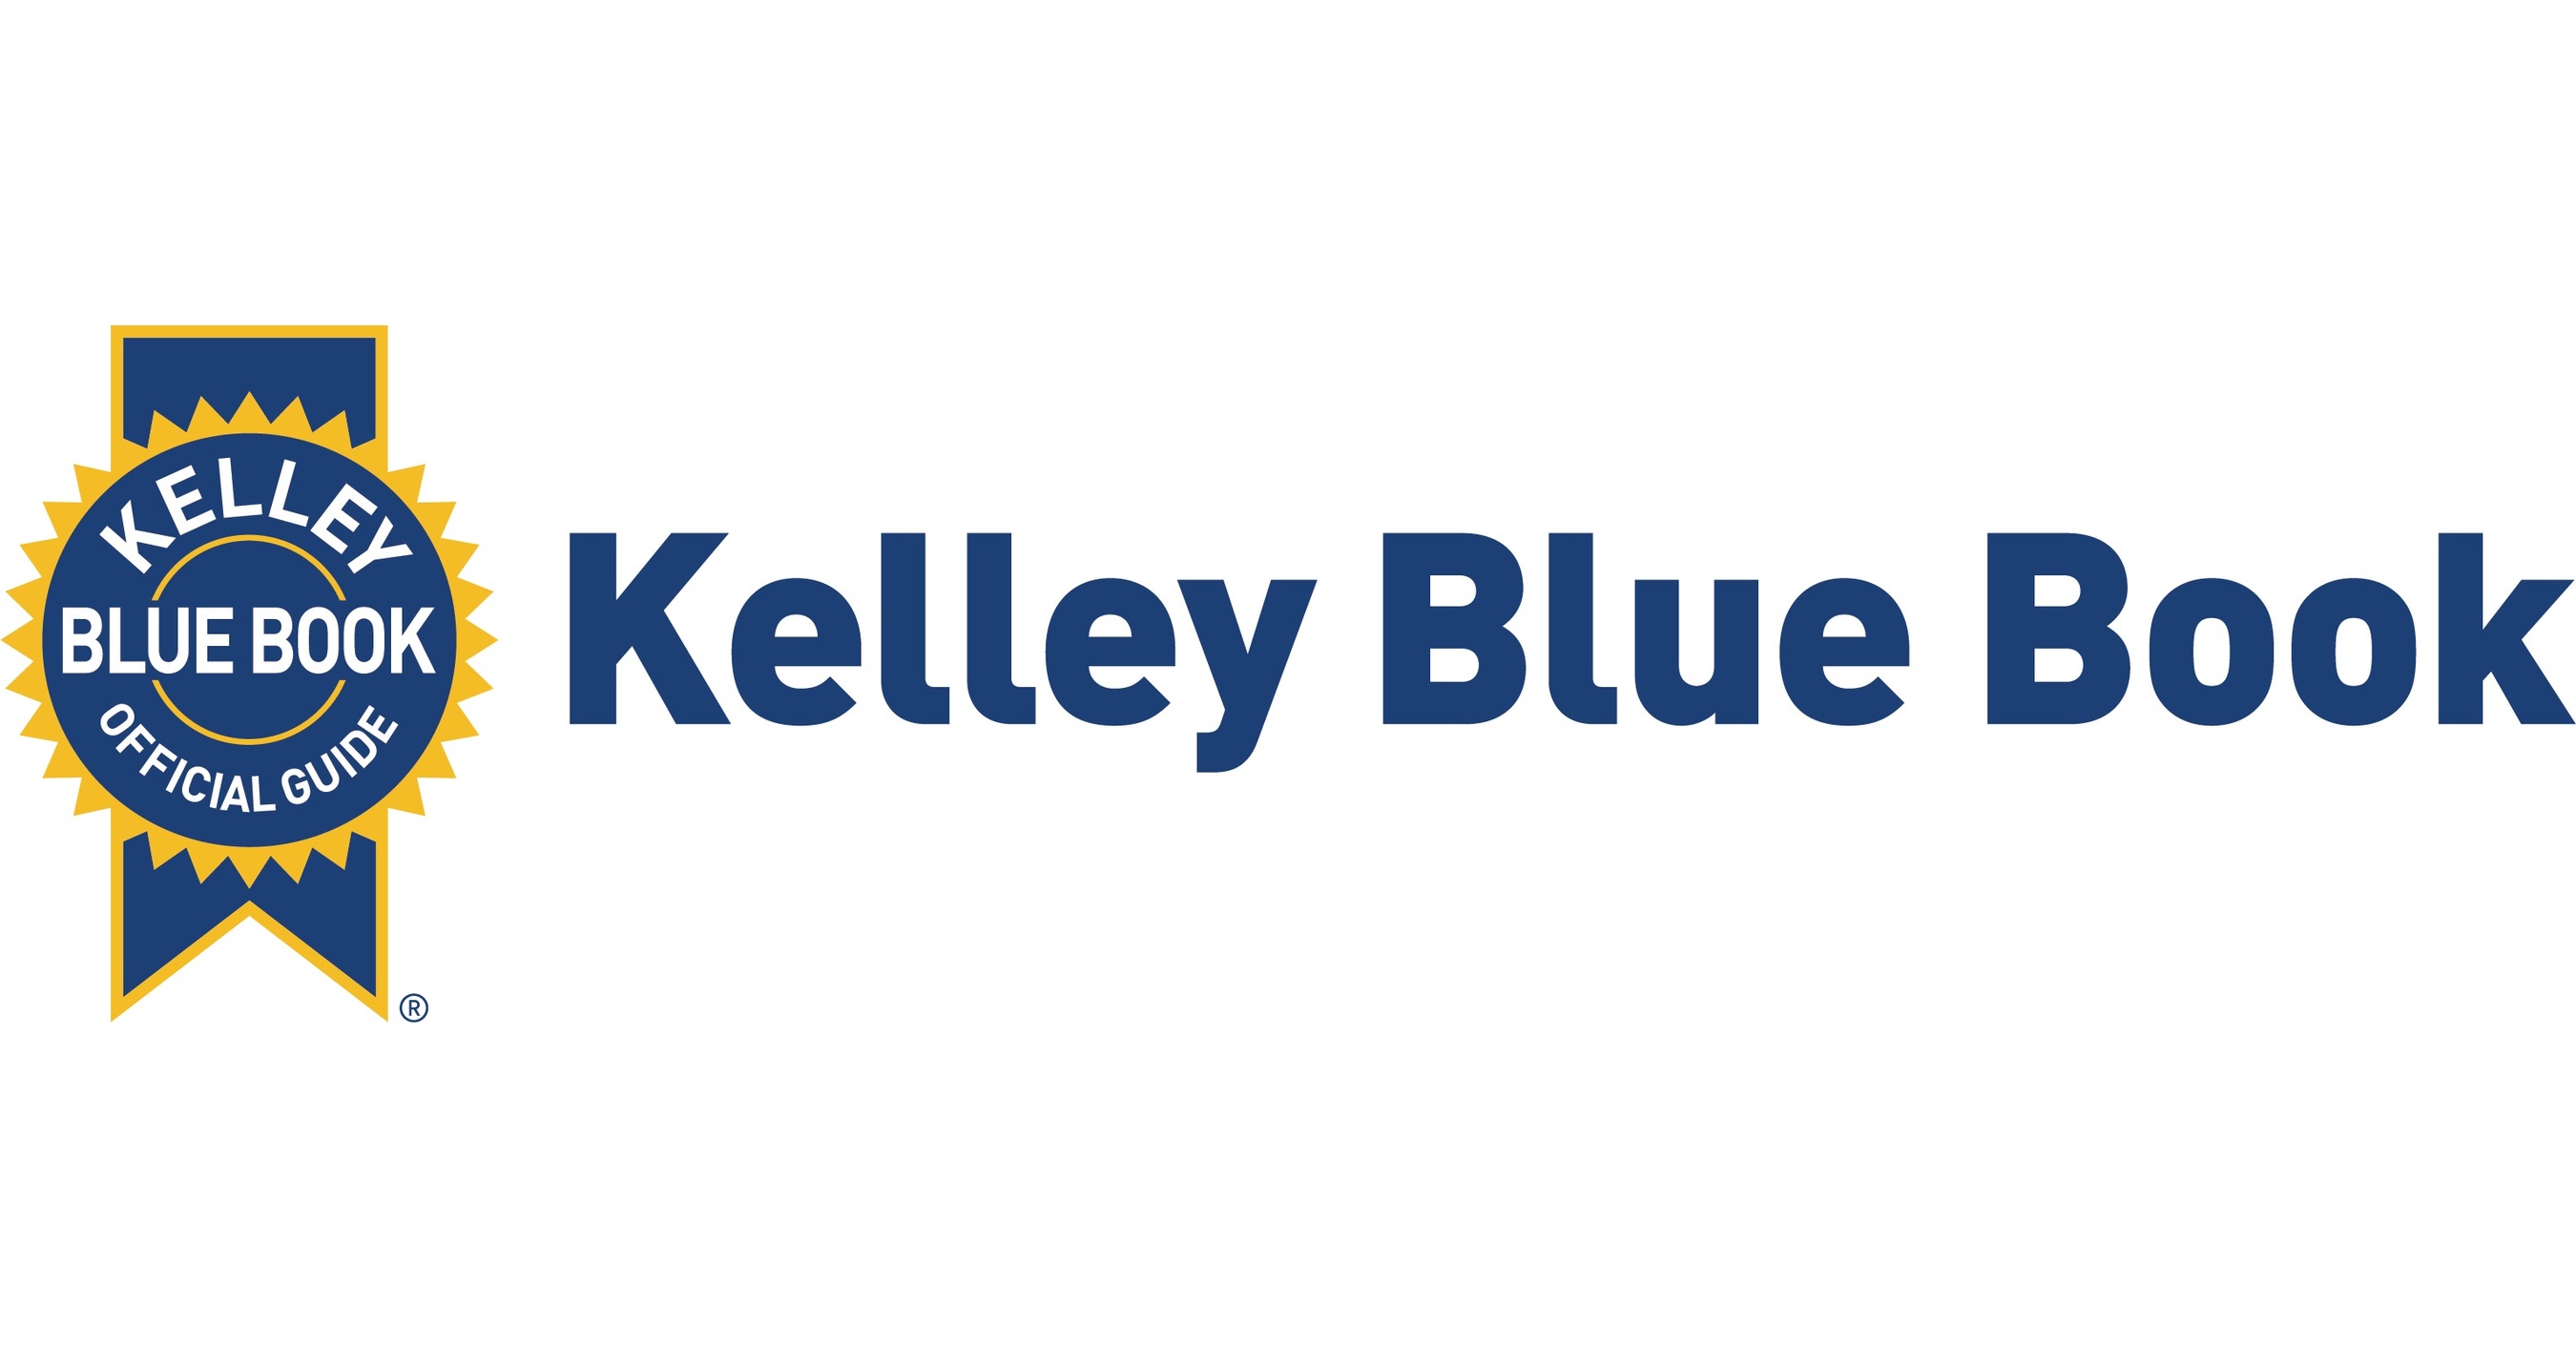 Kelley Blue Book Offers Financial And Direct Marketing Customers New